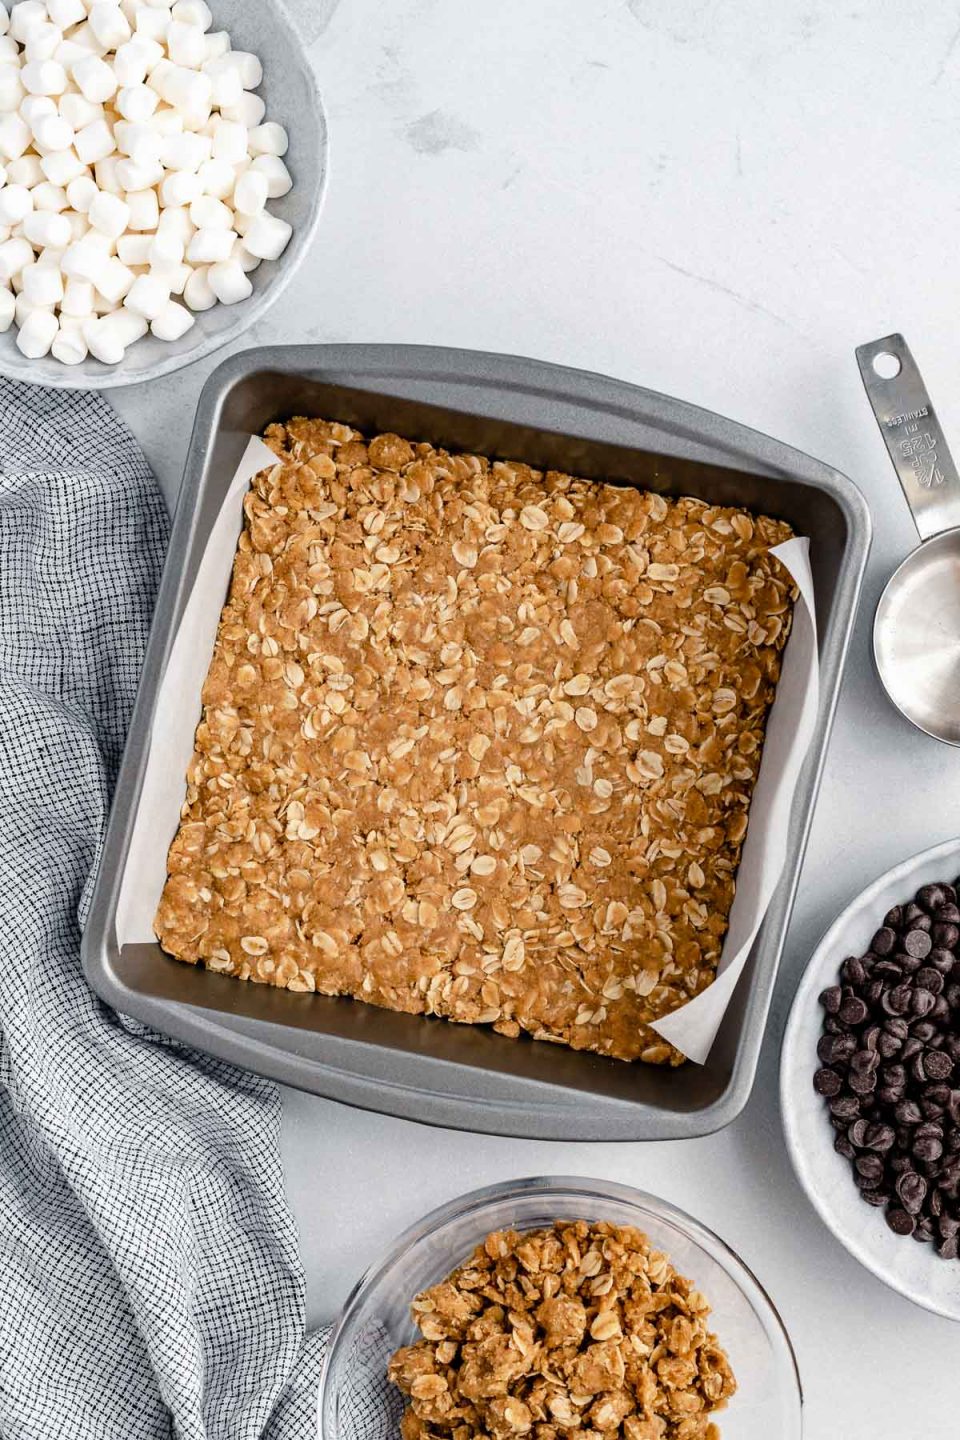 Graham cracker crumb crust pressed into a parchment-lined baking pan. The pan sits atop a white surface, surrounded by small bowls of marshmallows, dark chocolate chips & graham cracker crumb topping.